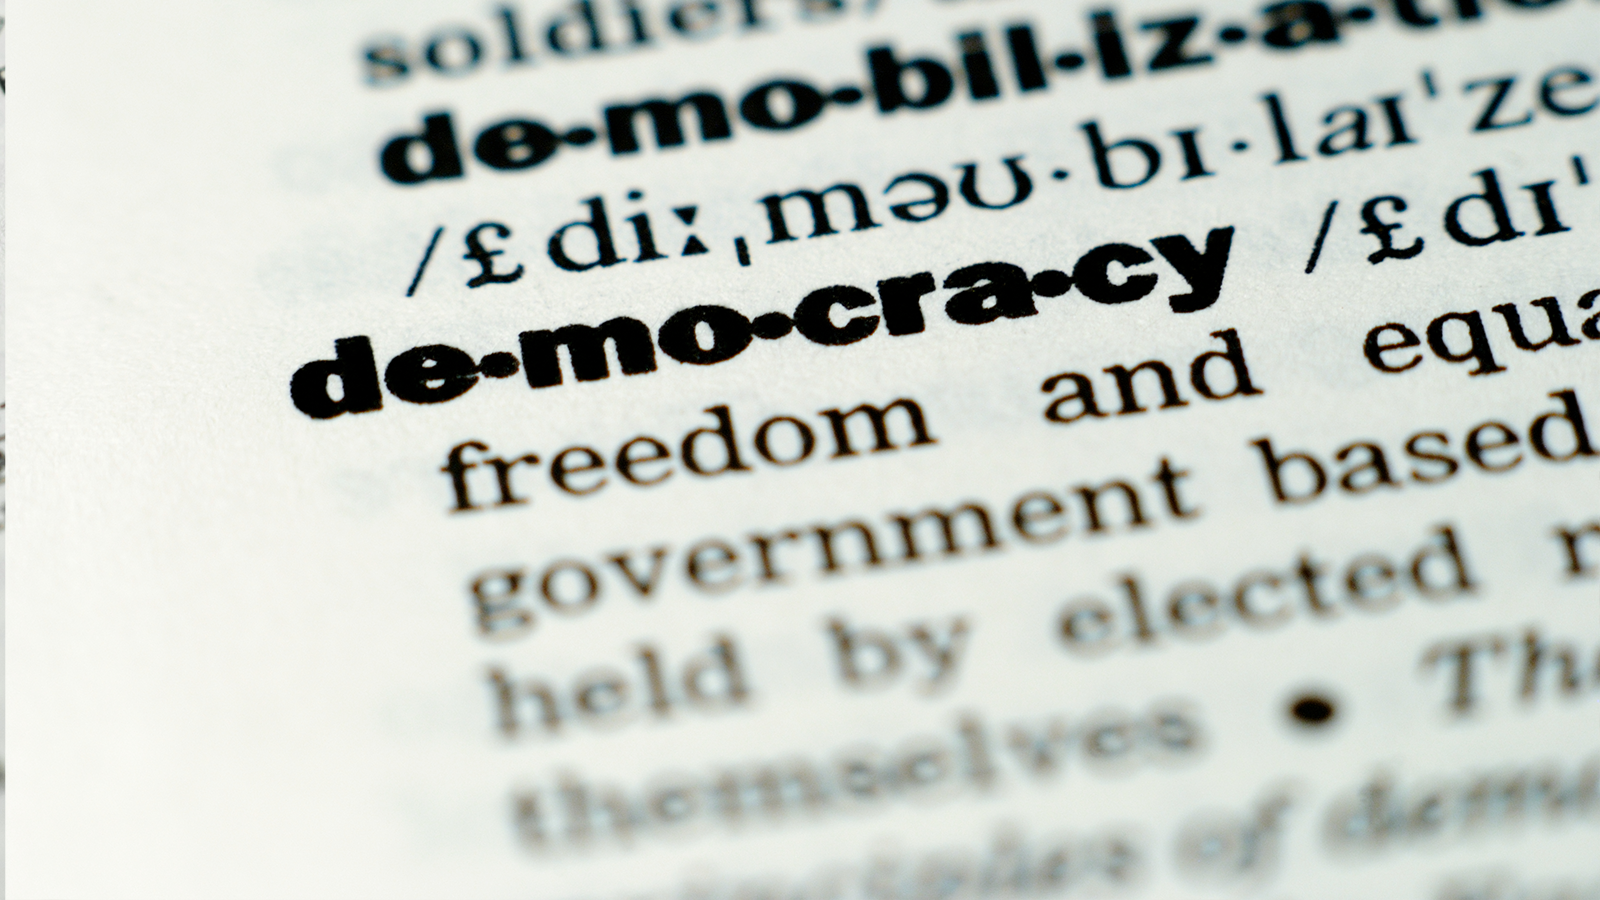 The Importance of Establishing Democracy in Elementary Classrooms